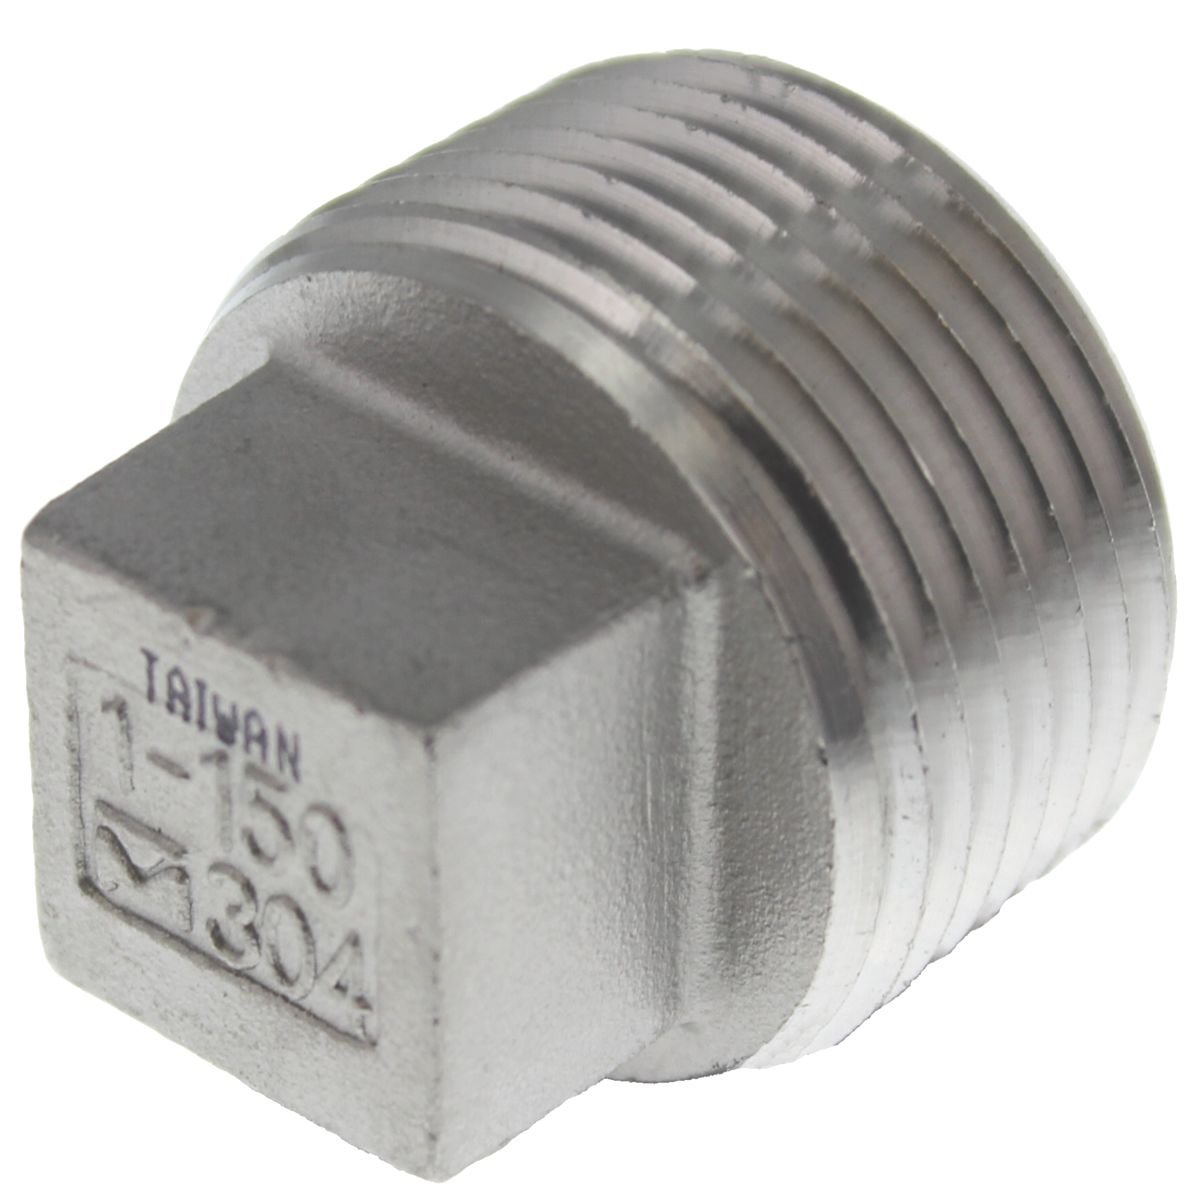 304 Stainless Steel Pipe Fitting 1-1/4" Square Head Plug